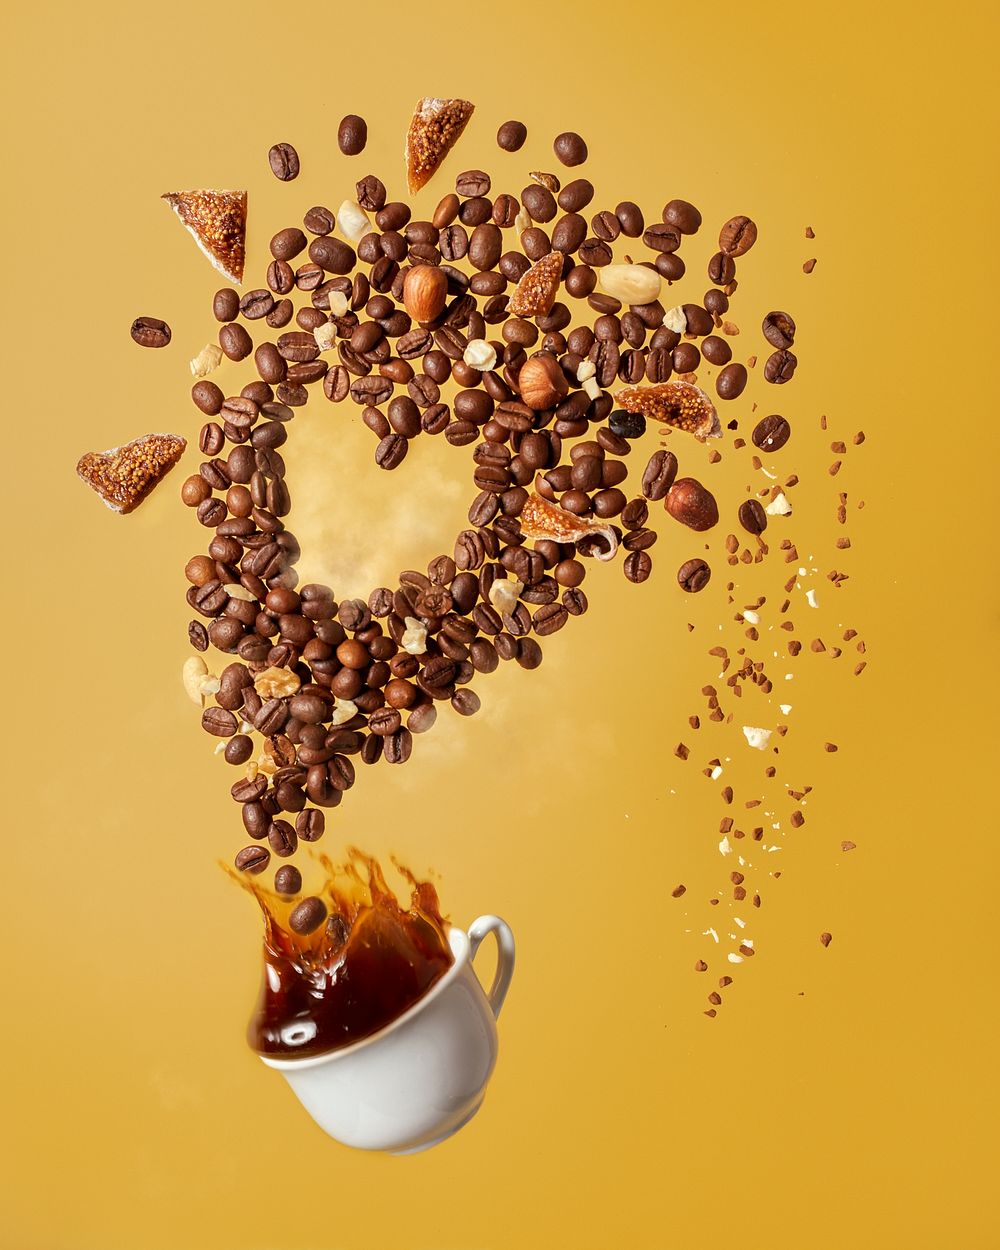 Free coffee and coffee beans image, public domain food & beverage CC0 photo.